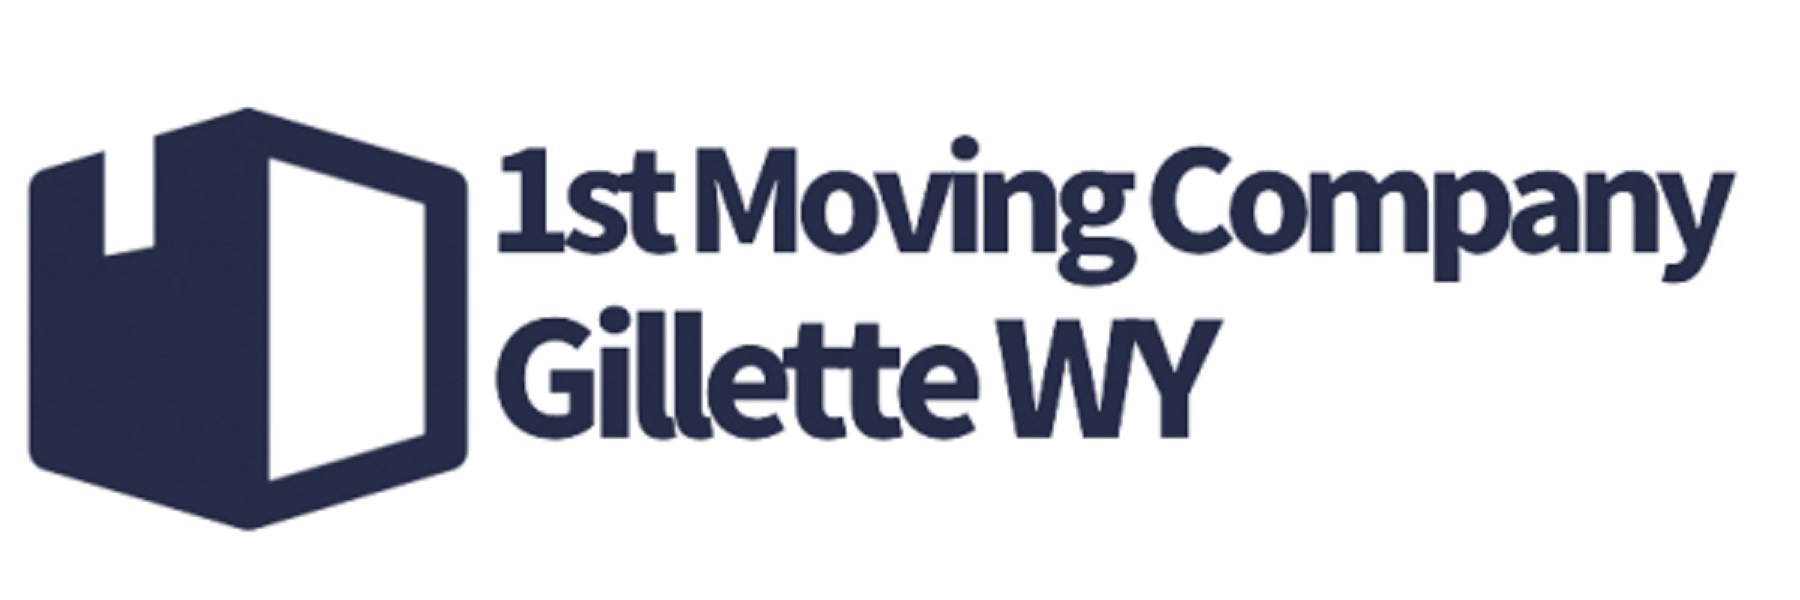 1st Moving Company Gillette WY